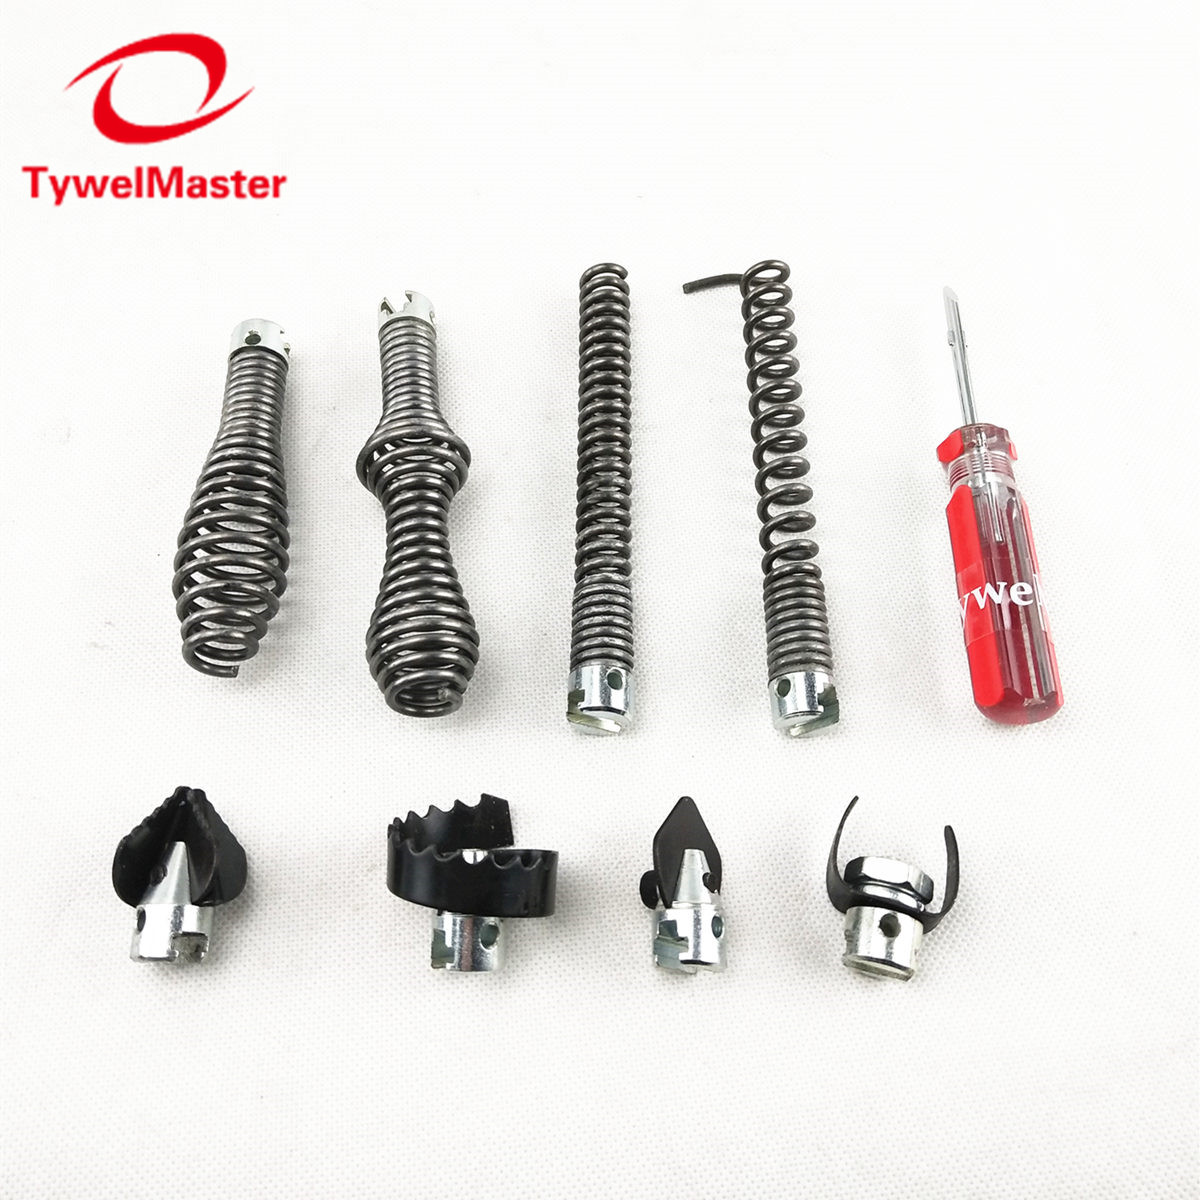 Sewer Snake Machine Accessories Soft Shaft 16mm 8pcs/PK Straight Bulb Restrieving Auger Blade Grease Sawtooth Cutter Pipe Clean